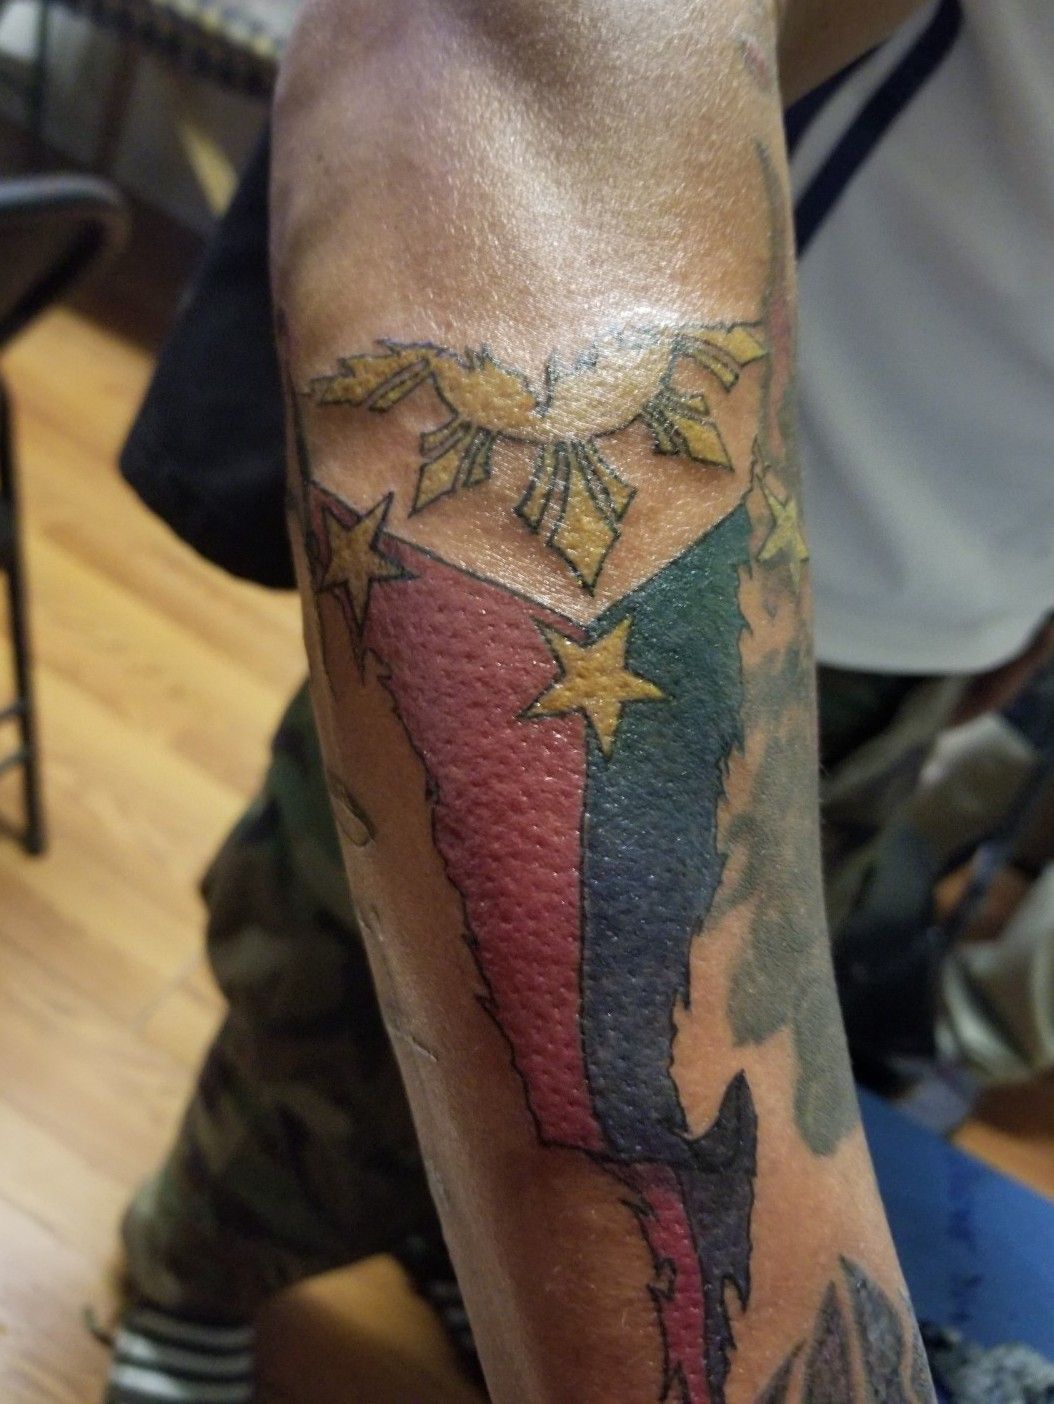 Philippine Map Tattoo Pm for  Nocturnal Tattoo Studio  Facebook